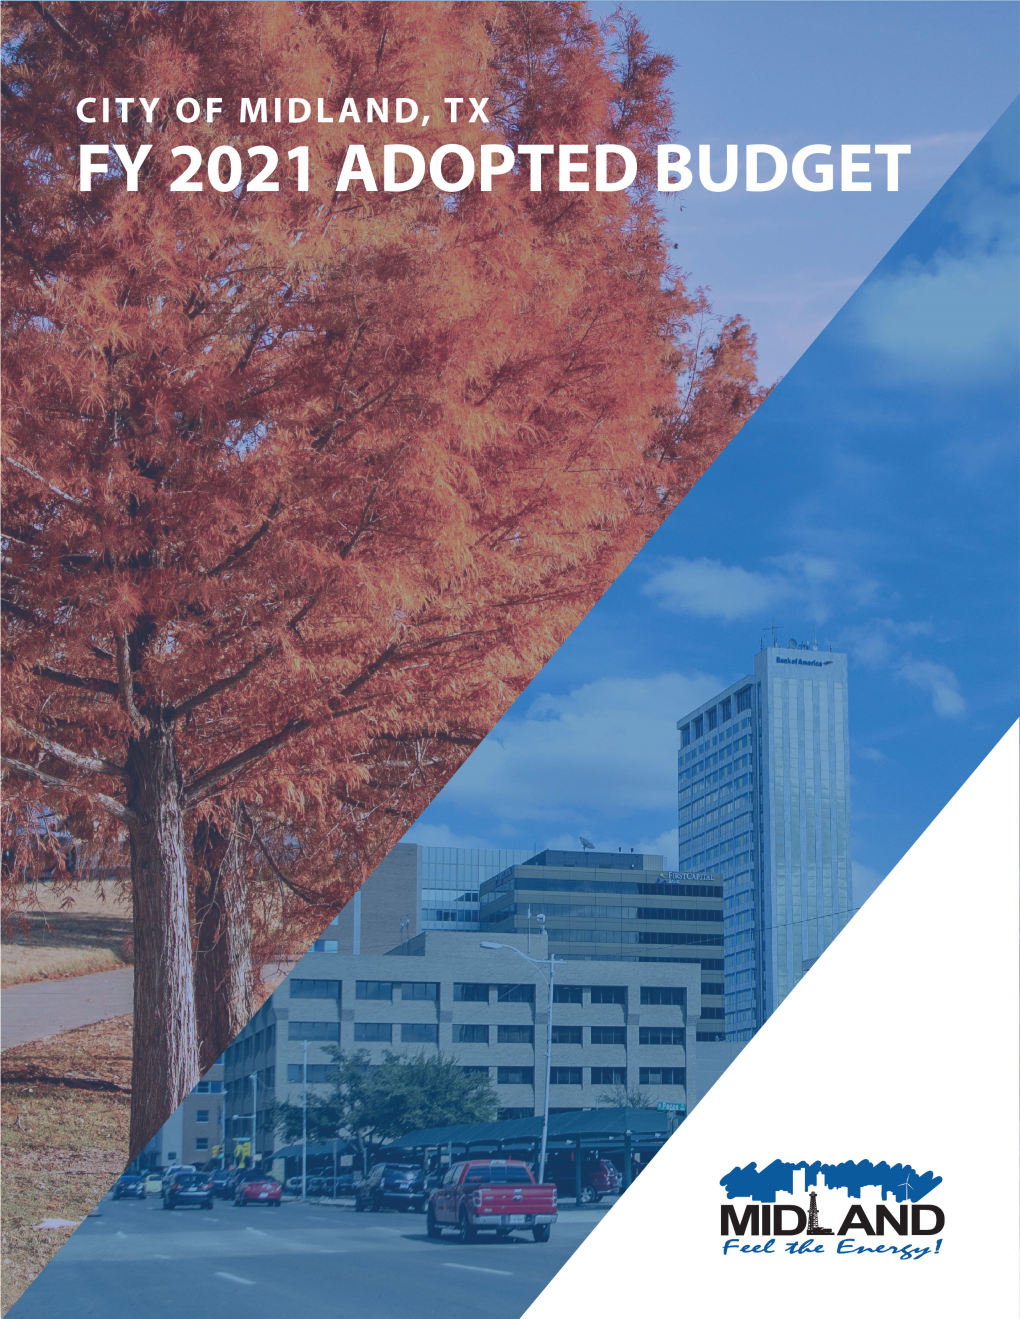 Annual Operating Budget Fiscal Year 2021